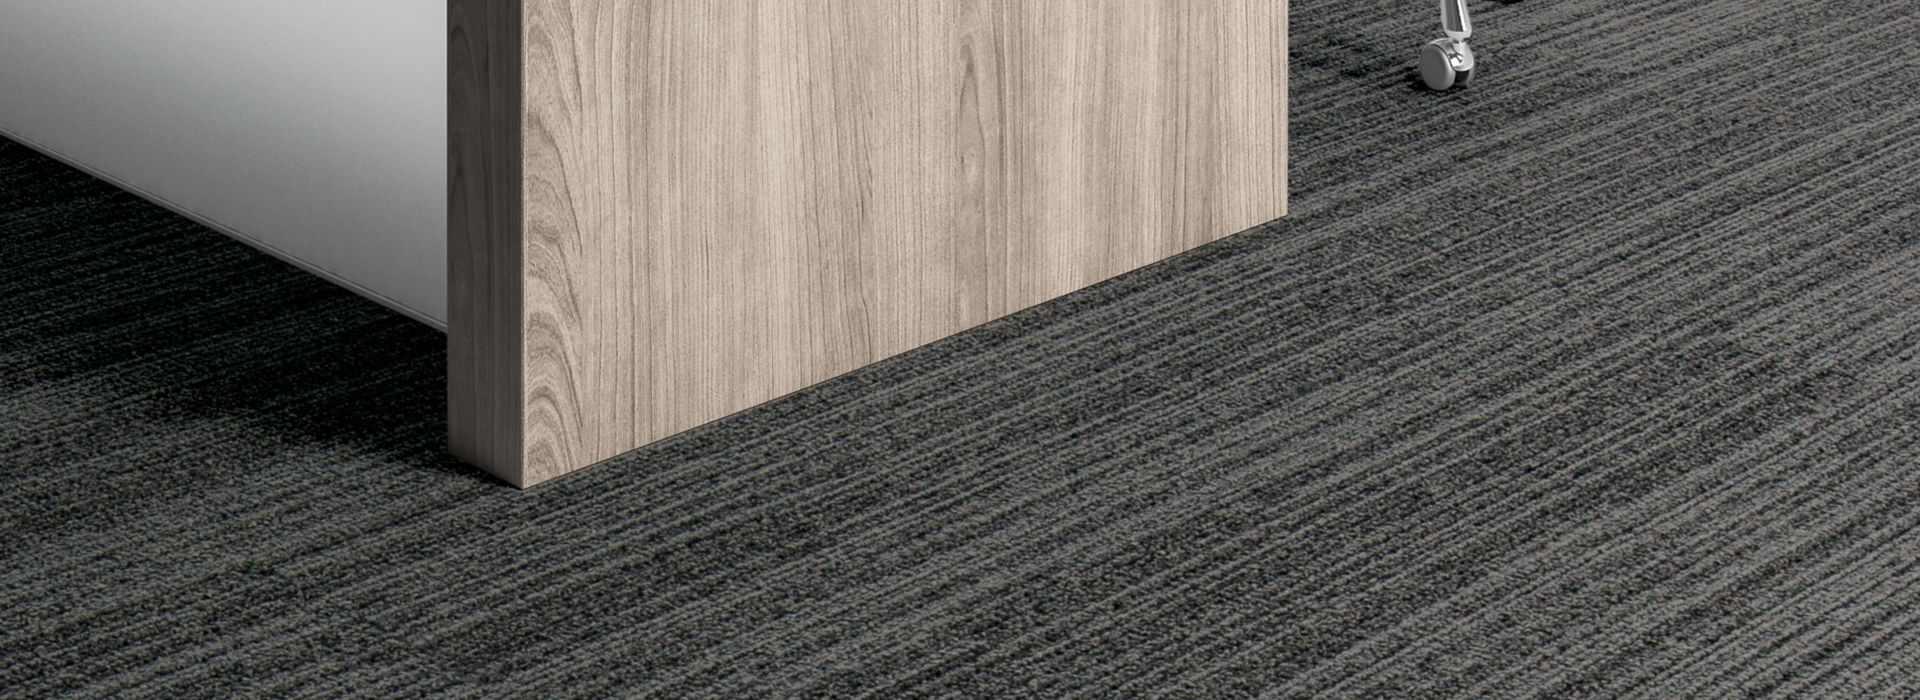 Interface SL910 plank carpet tile with desk and chair